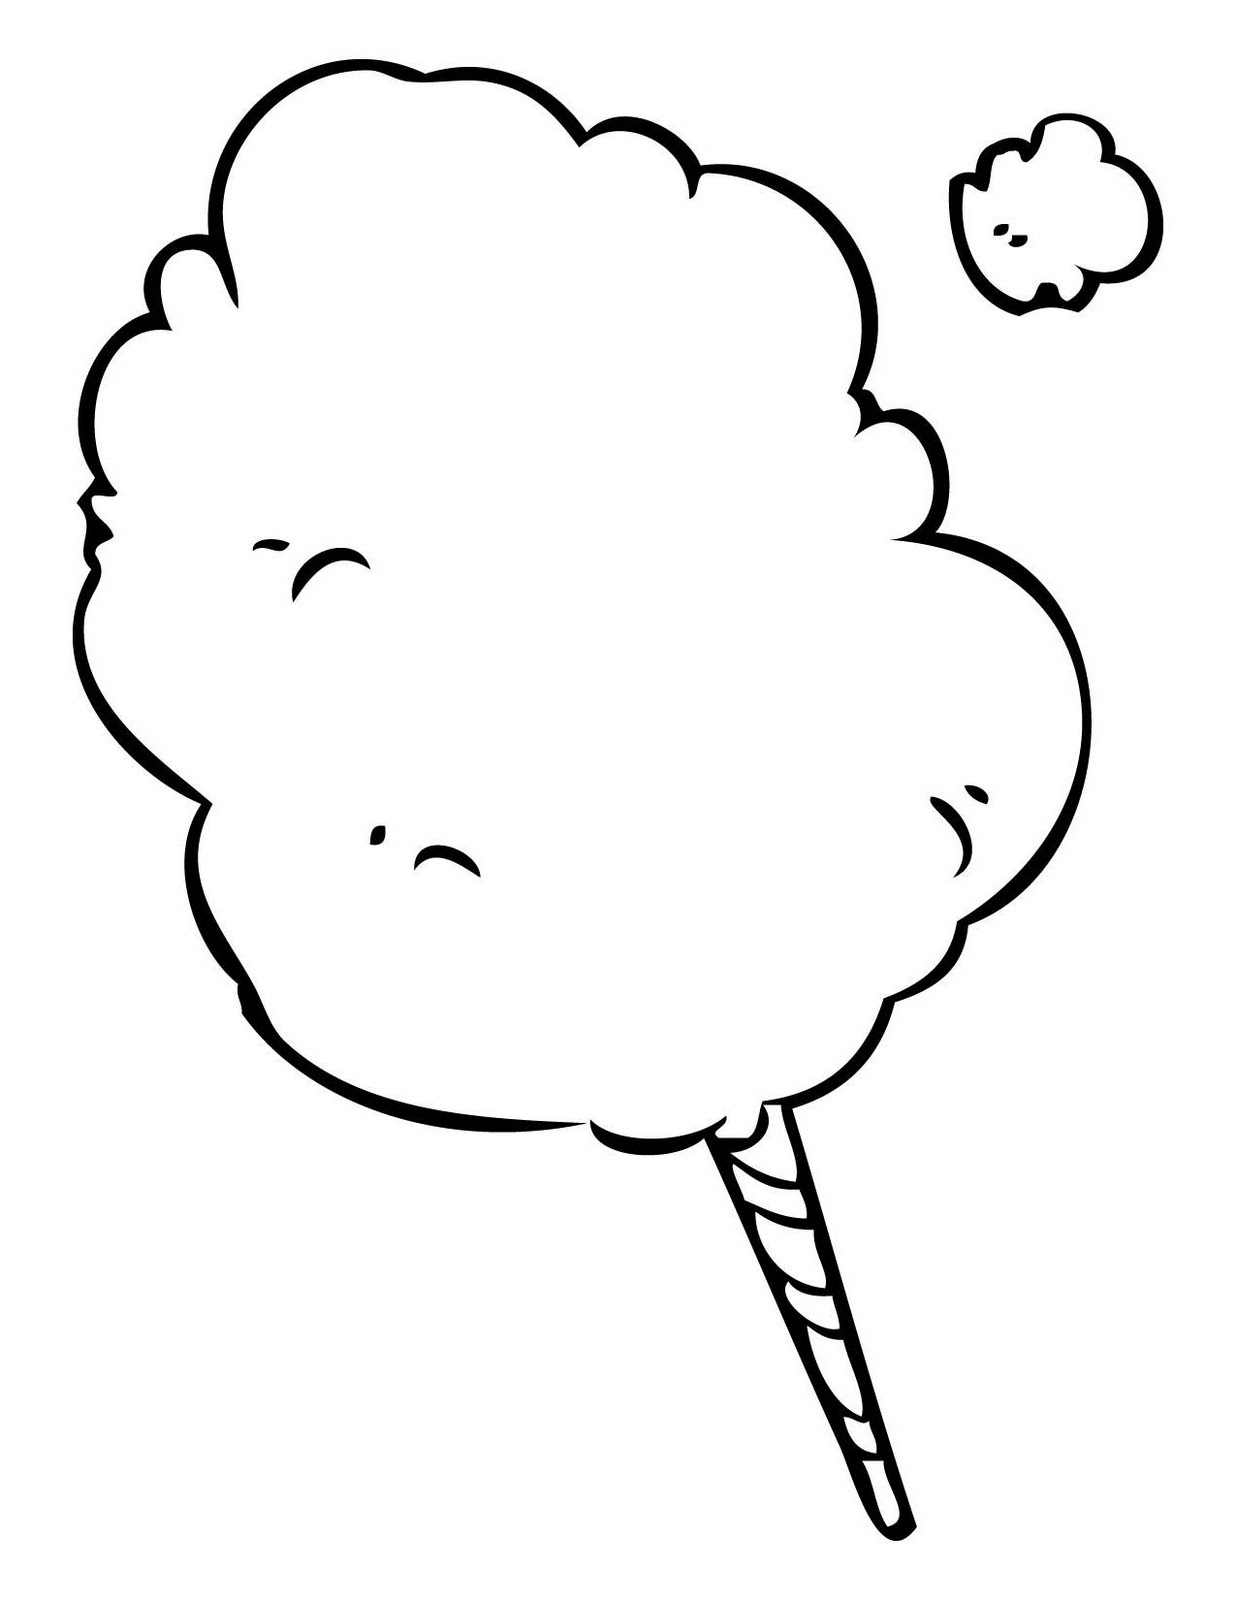 Cotton Candy Clipart | Free Download Clip Art | Free Clip Art | on ...